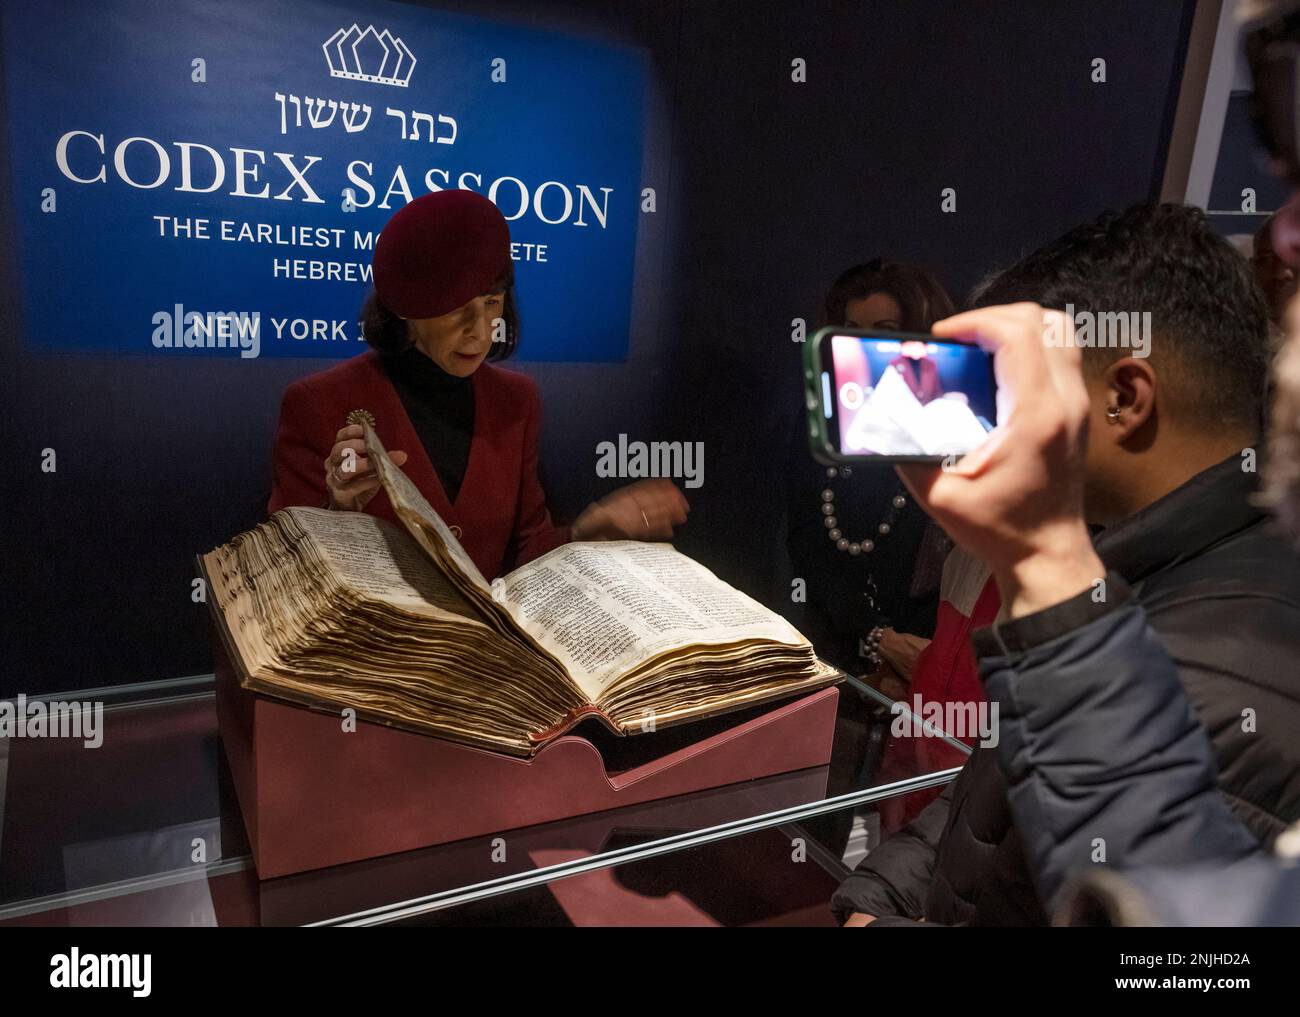 Sotheby’s, London, UK. 22 February 2023 (Image EMBARGOED until 01.00am GMT on Thursday 23 February 2023). The earliest and most complete Hebrew Bible, known as Codex Sassoon, will be offered in New York in May, estimated at $30,000,000-50,000,000, considered one of the most influential books in history. A global tour sees the magnificent volume return to display, beginning with an exhibition 22–28 February at Sotheby’s in London, followed by stops in Tel Aviv, Dallas, Los Angeles and New York City. Credit: Malcolm Park/Alamy Live News. Stock Photo